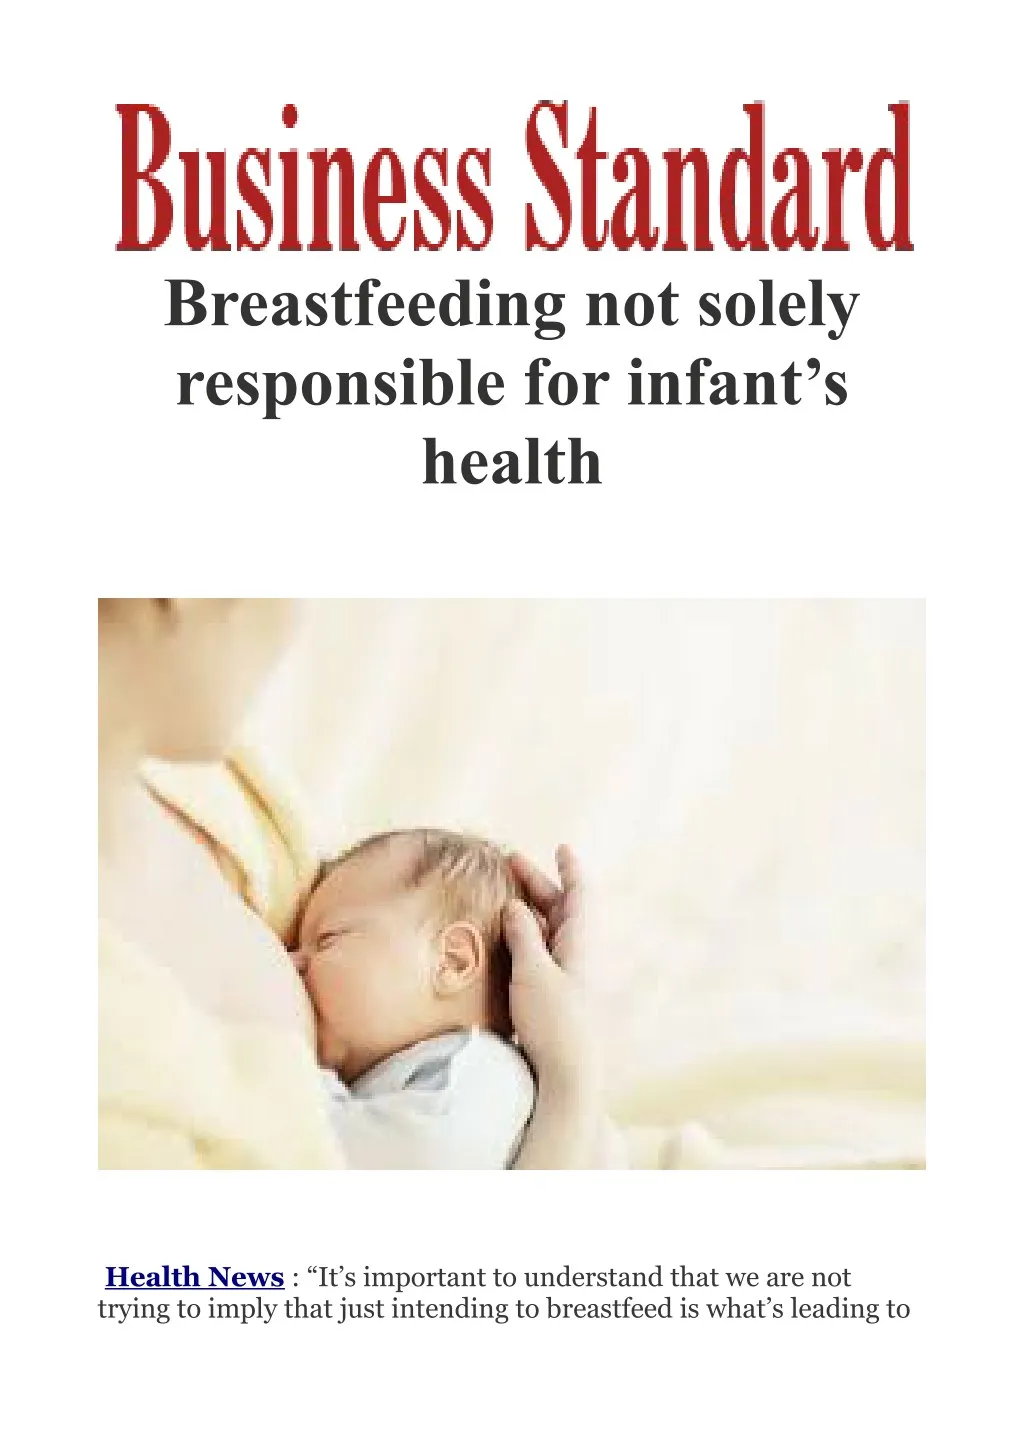 breastfeeding not solely responsible for infant